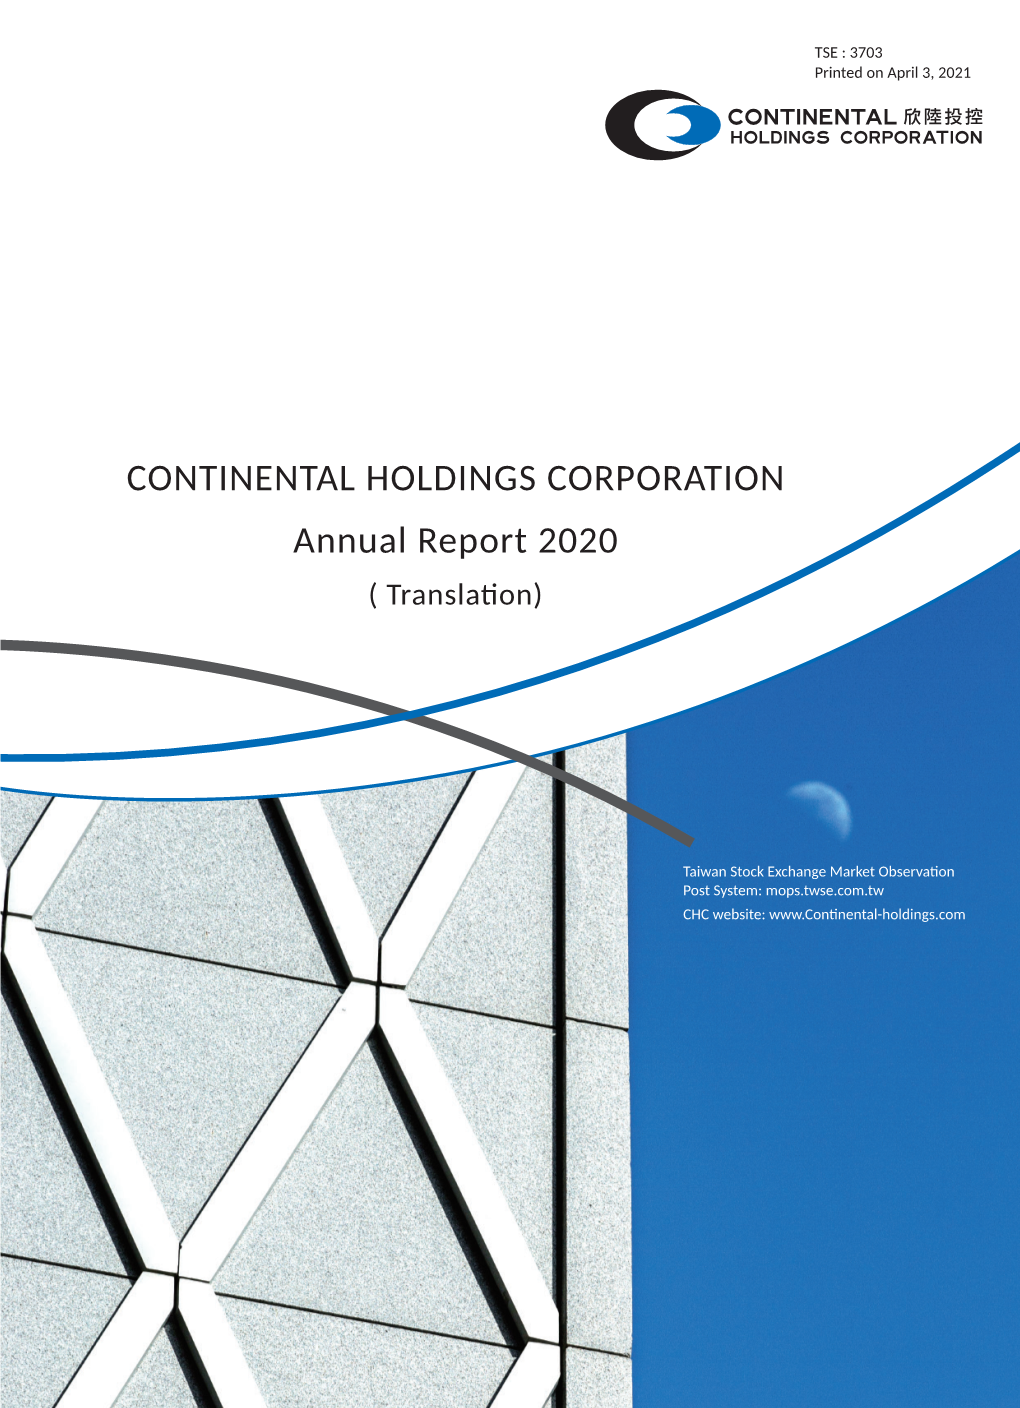 Annual Report 2020 CONTINENTAL HOLDINGS CORPORATION